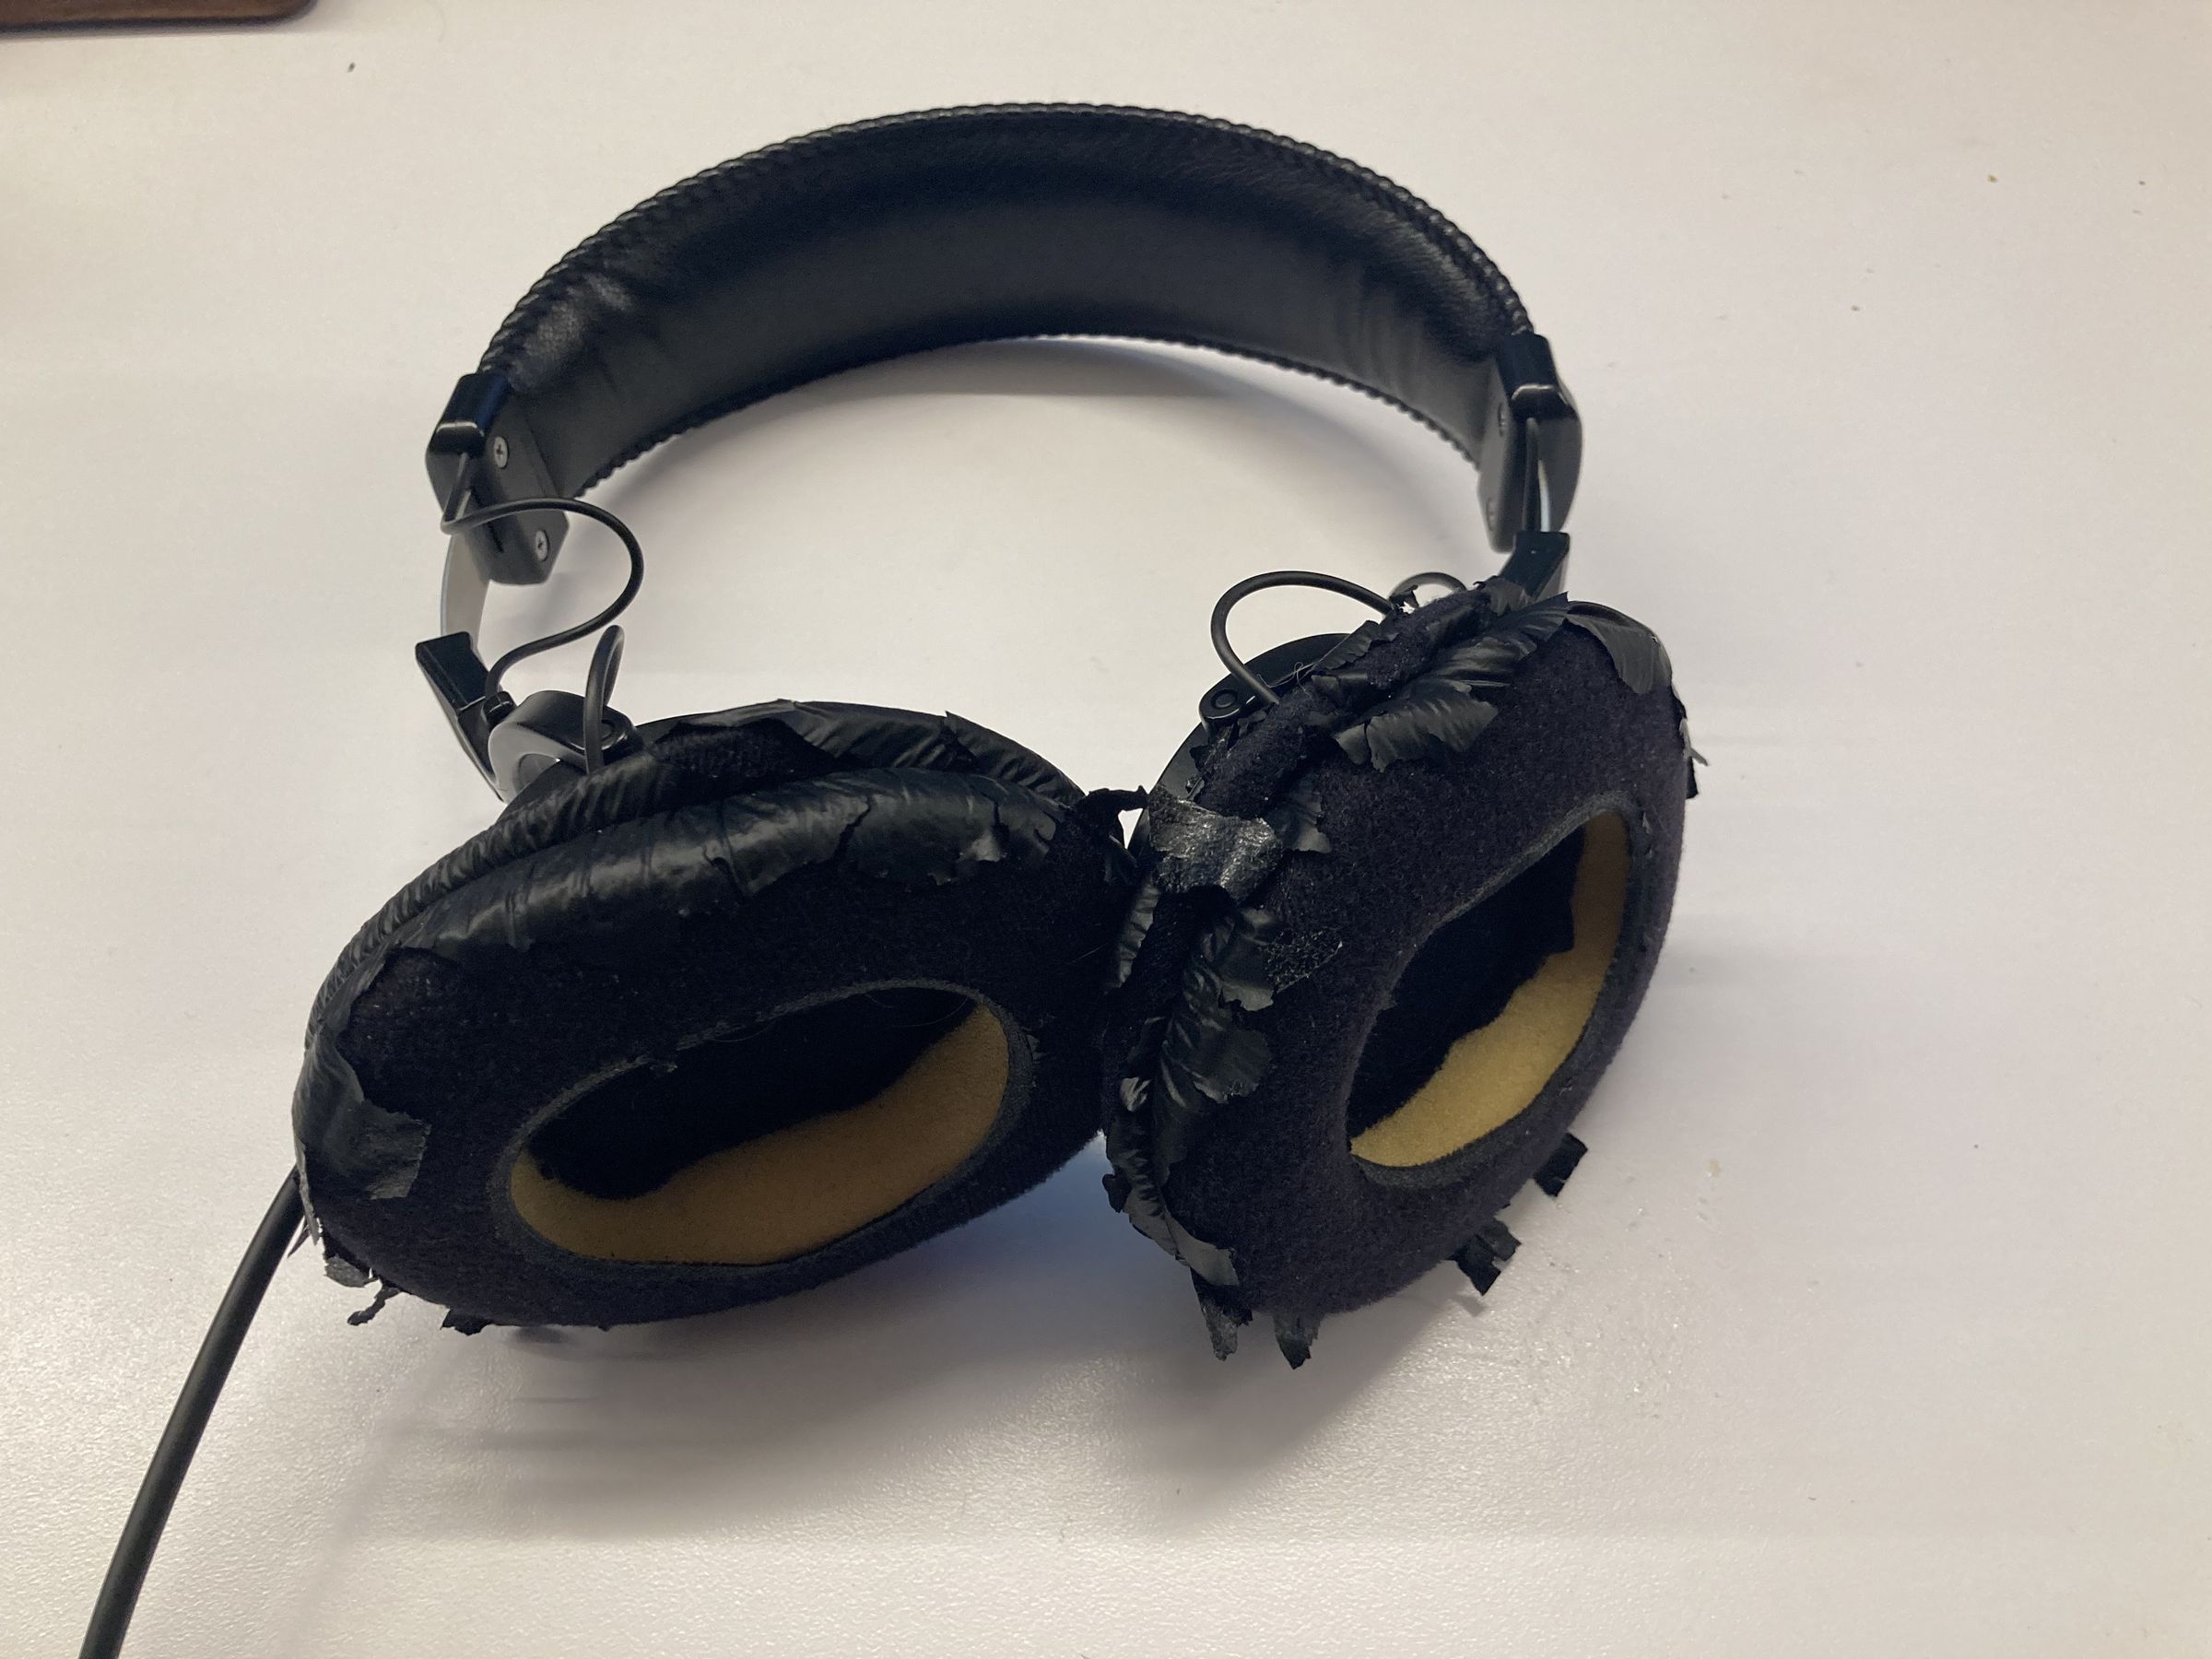 A pair of Sony MDR-7506 with badly deteriorated headphone pads.